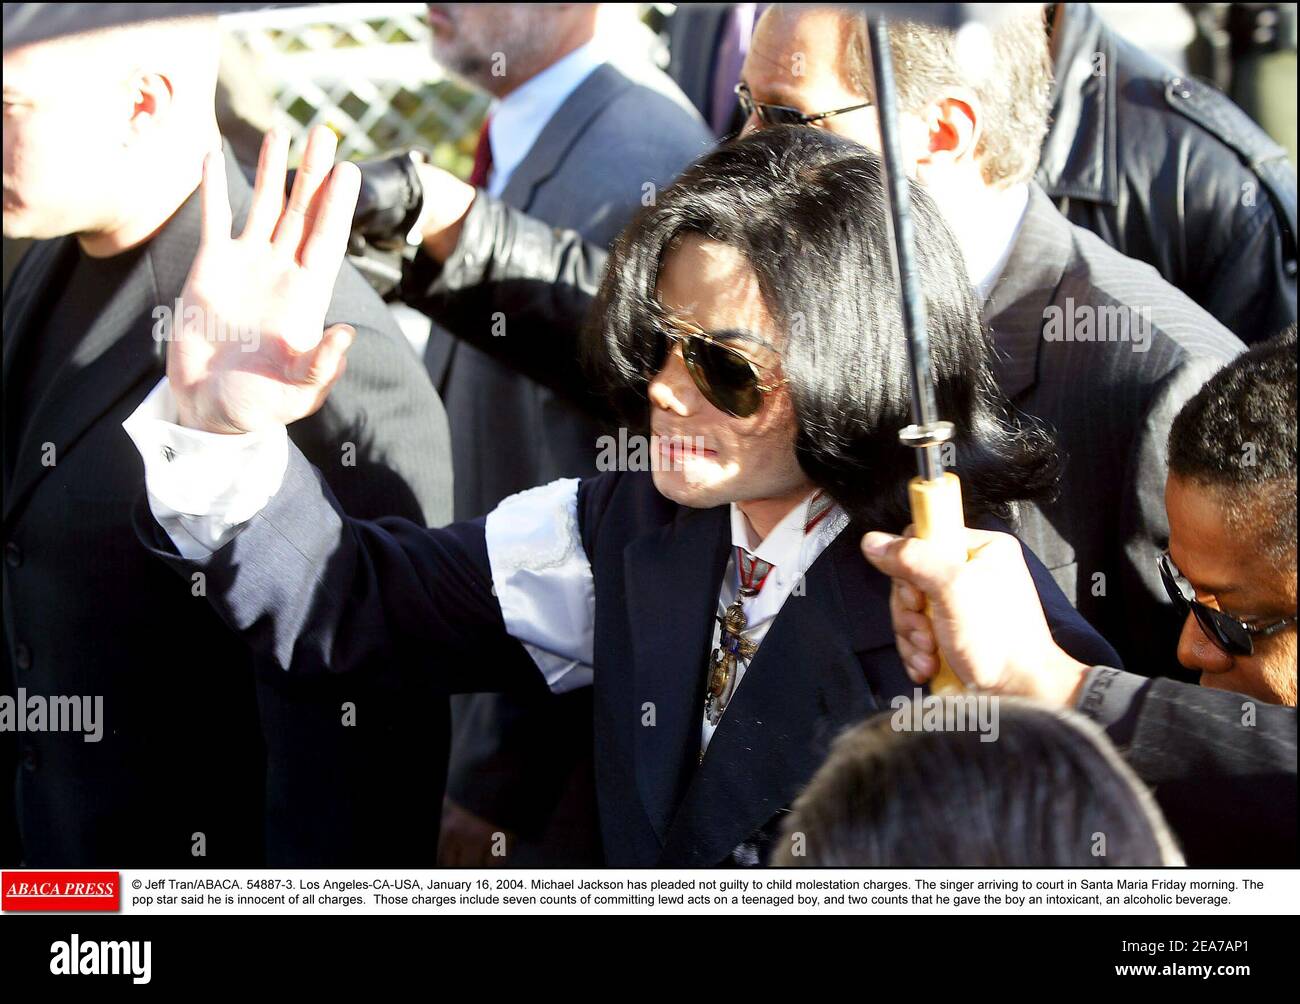 © Jeff Tran/ABACA. 54887-3. Los Angeles-CA-USA, January 16, 2004. Michael Jackson has pleaded not guilty to child molestation charges. The singer arriving to court in Santa Maria Friday morning. The pop star said he is innocent of all charges. Those charges include seven counts of committing lewd acts on a teenaged boy, and two counts that he gave the boy an intoxicant, an alcoholic beverage. Stock Photo